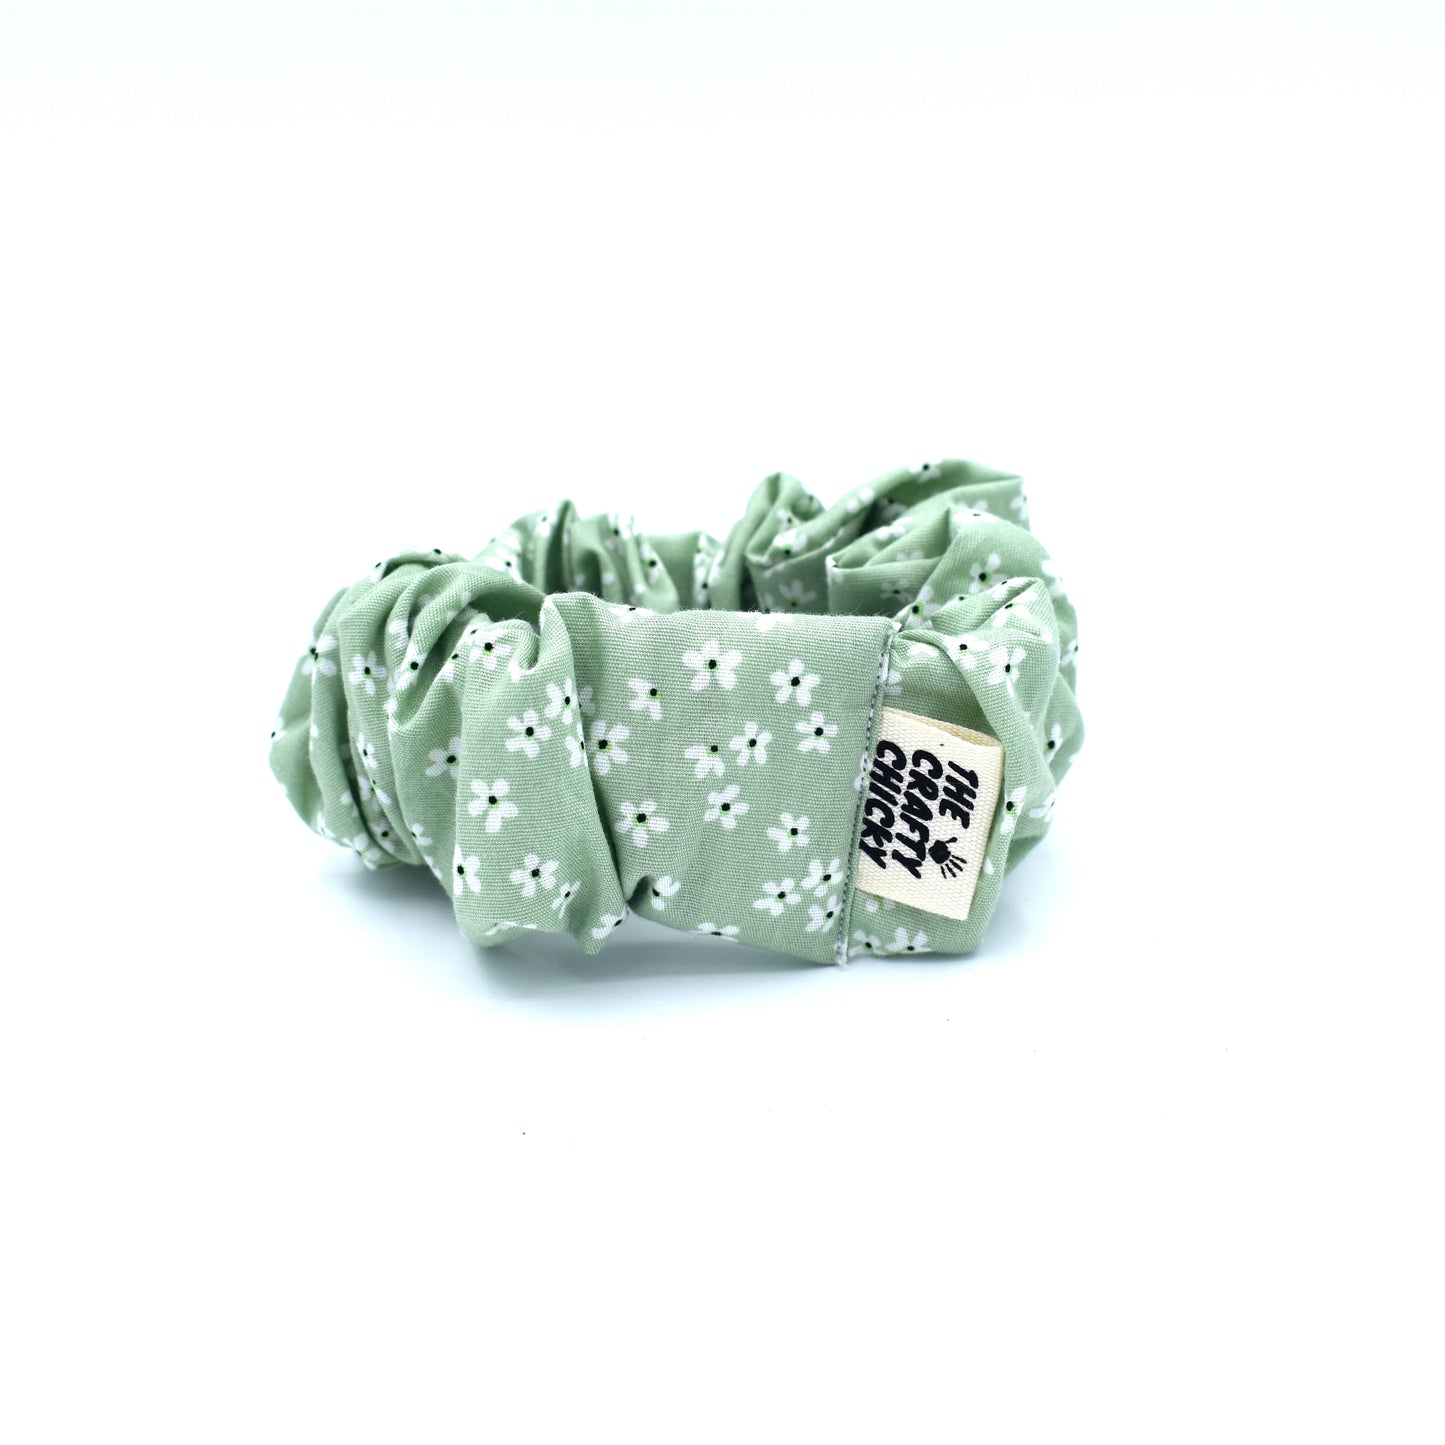 Green Floral Scrunchie with The Crafty Chicky tag